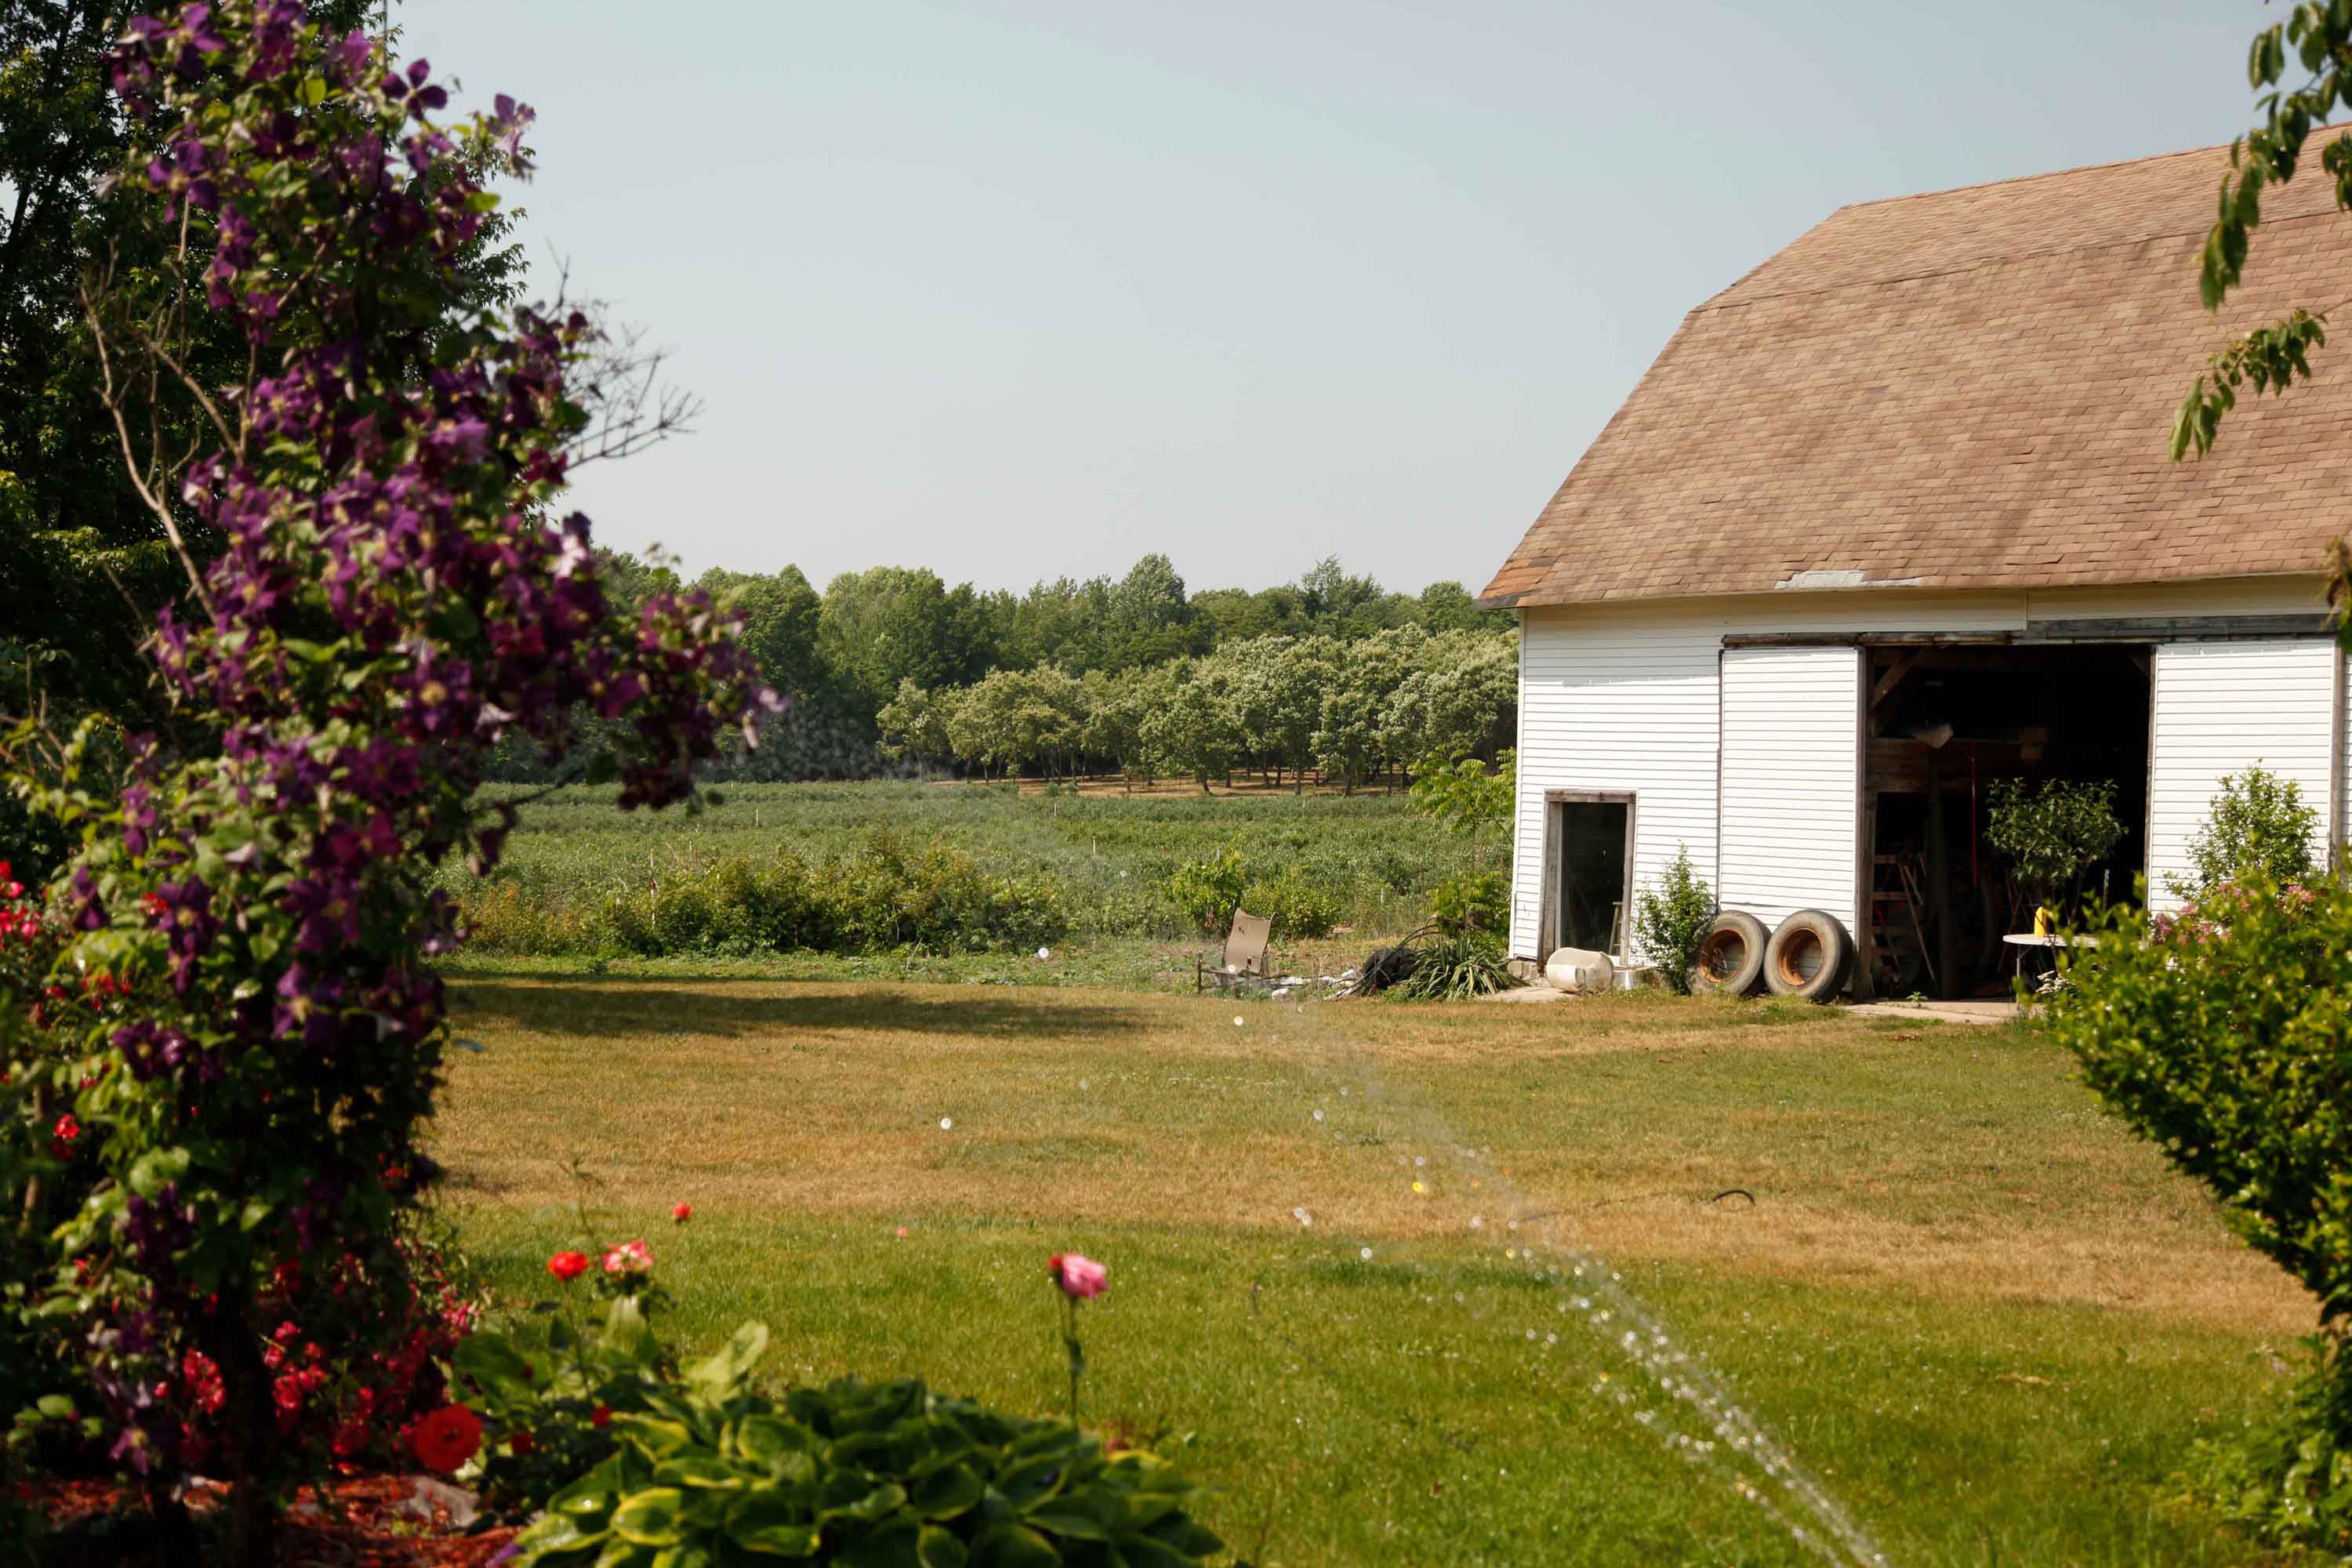 A view of the chestnut grove beyond rows of blueberry plants are framed by a colorful flower garden hedge on the left and a white barn on the right.